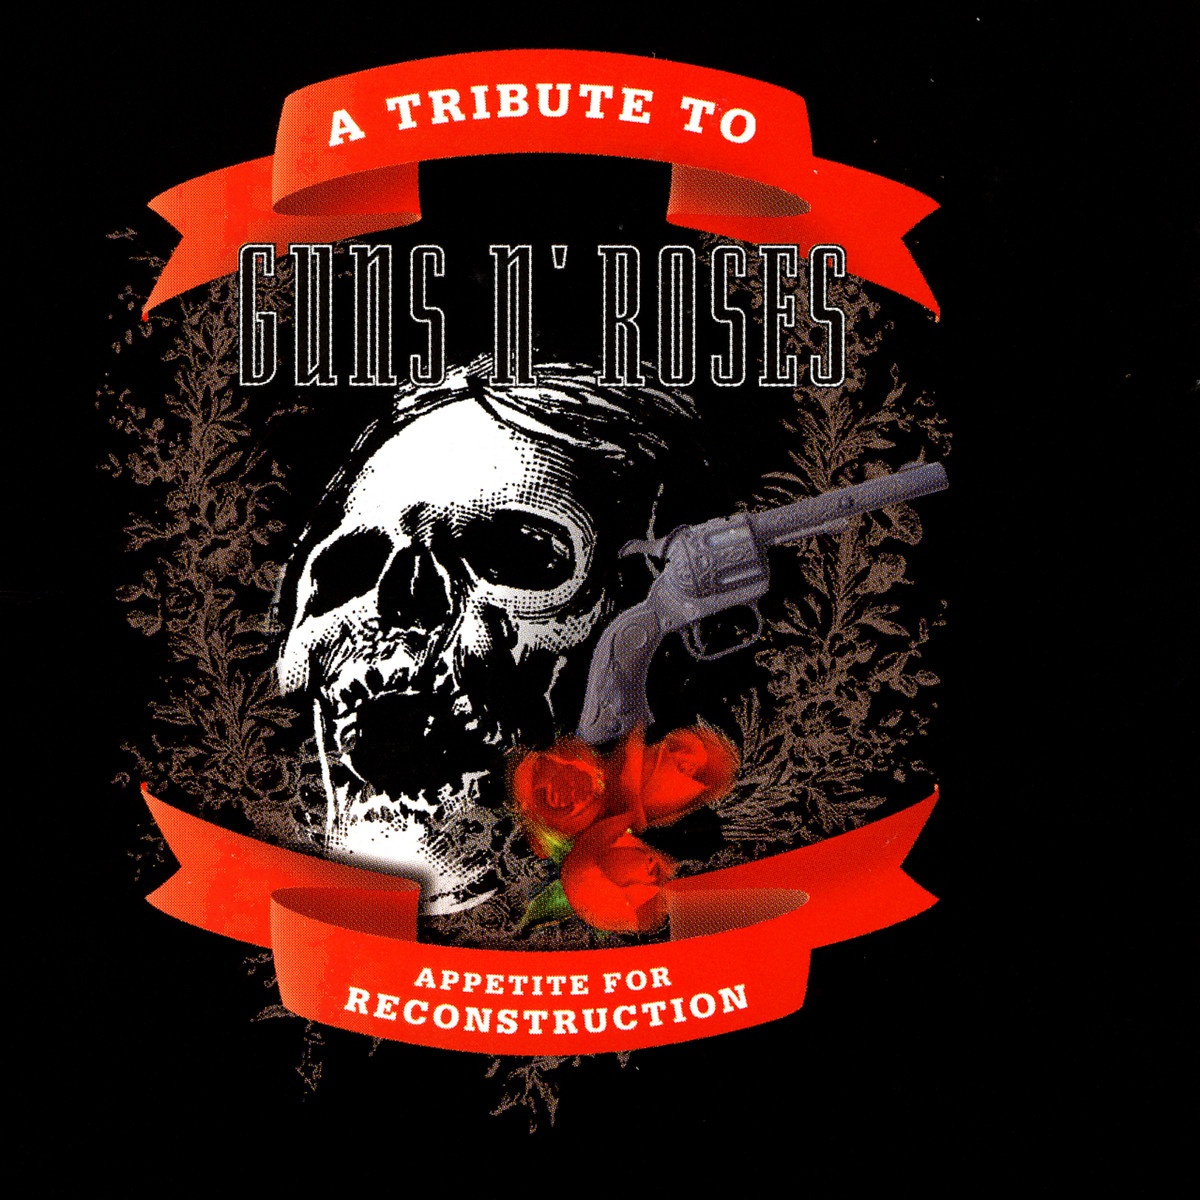 Appetite For Reconstruction - A Tribute To Guns 'n' Roses